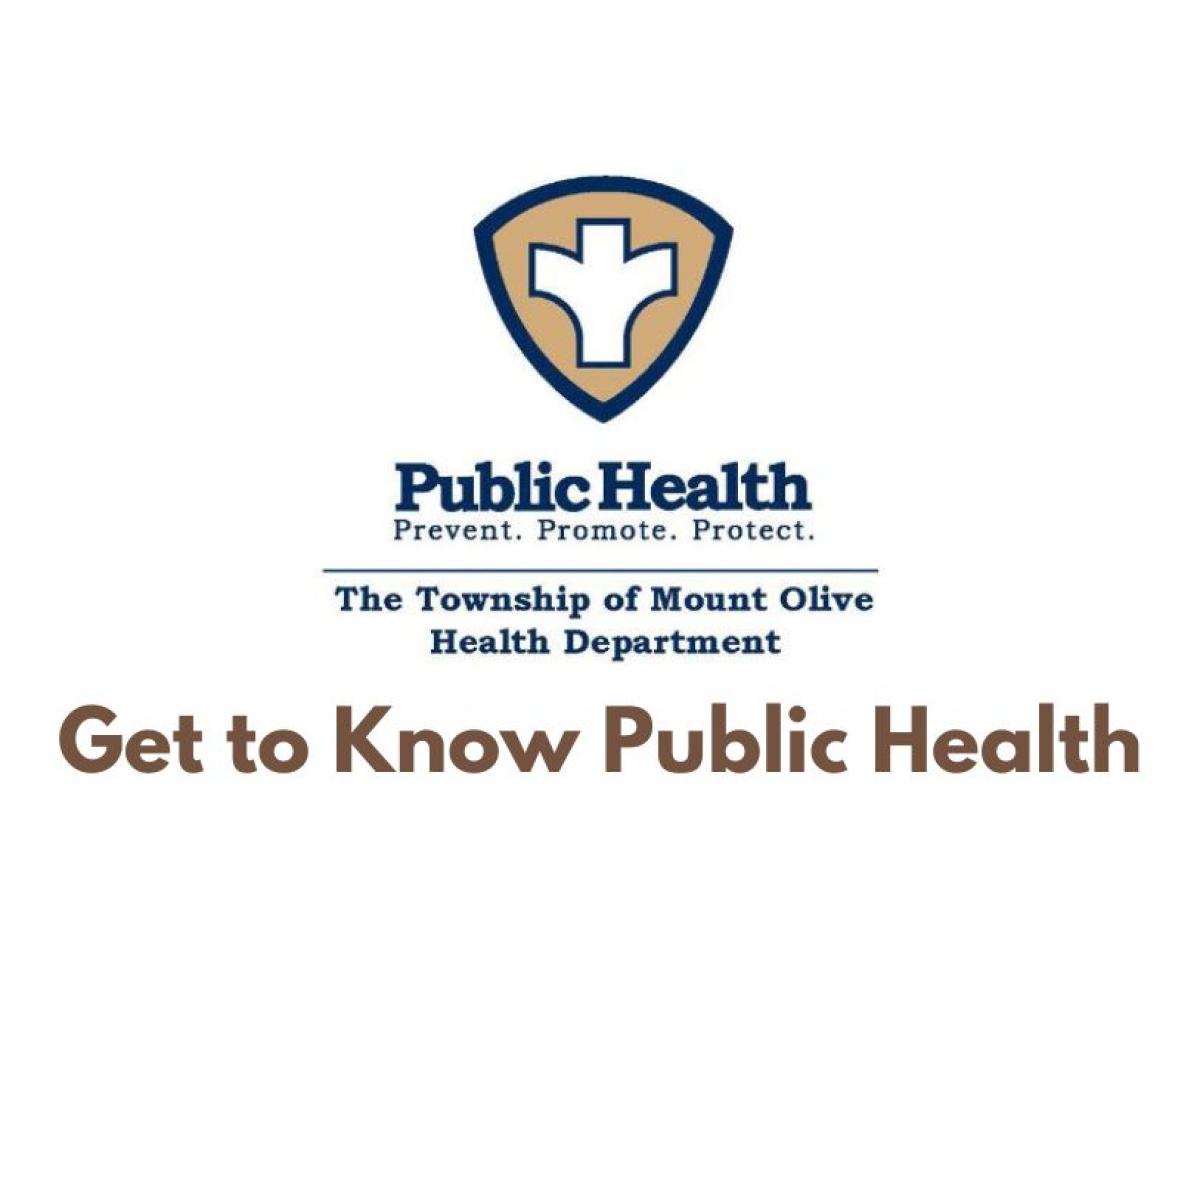 Get to know public health